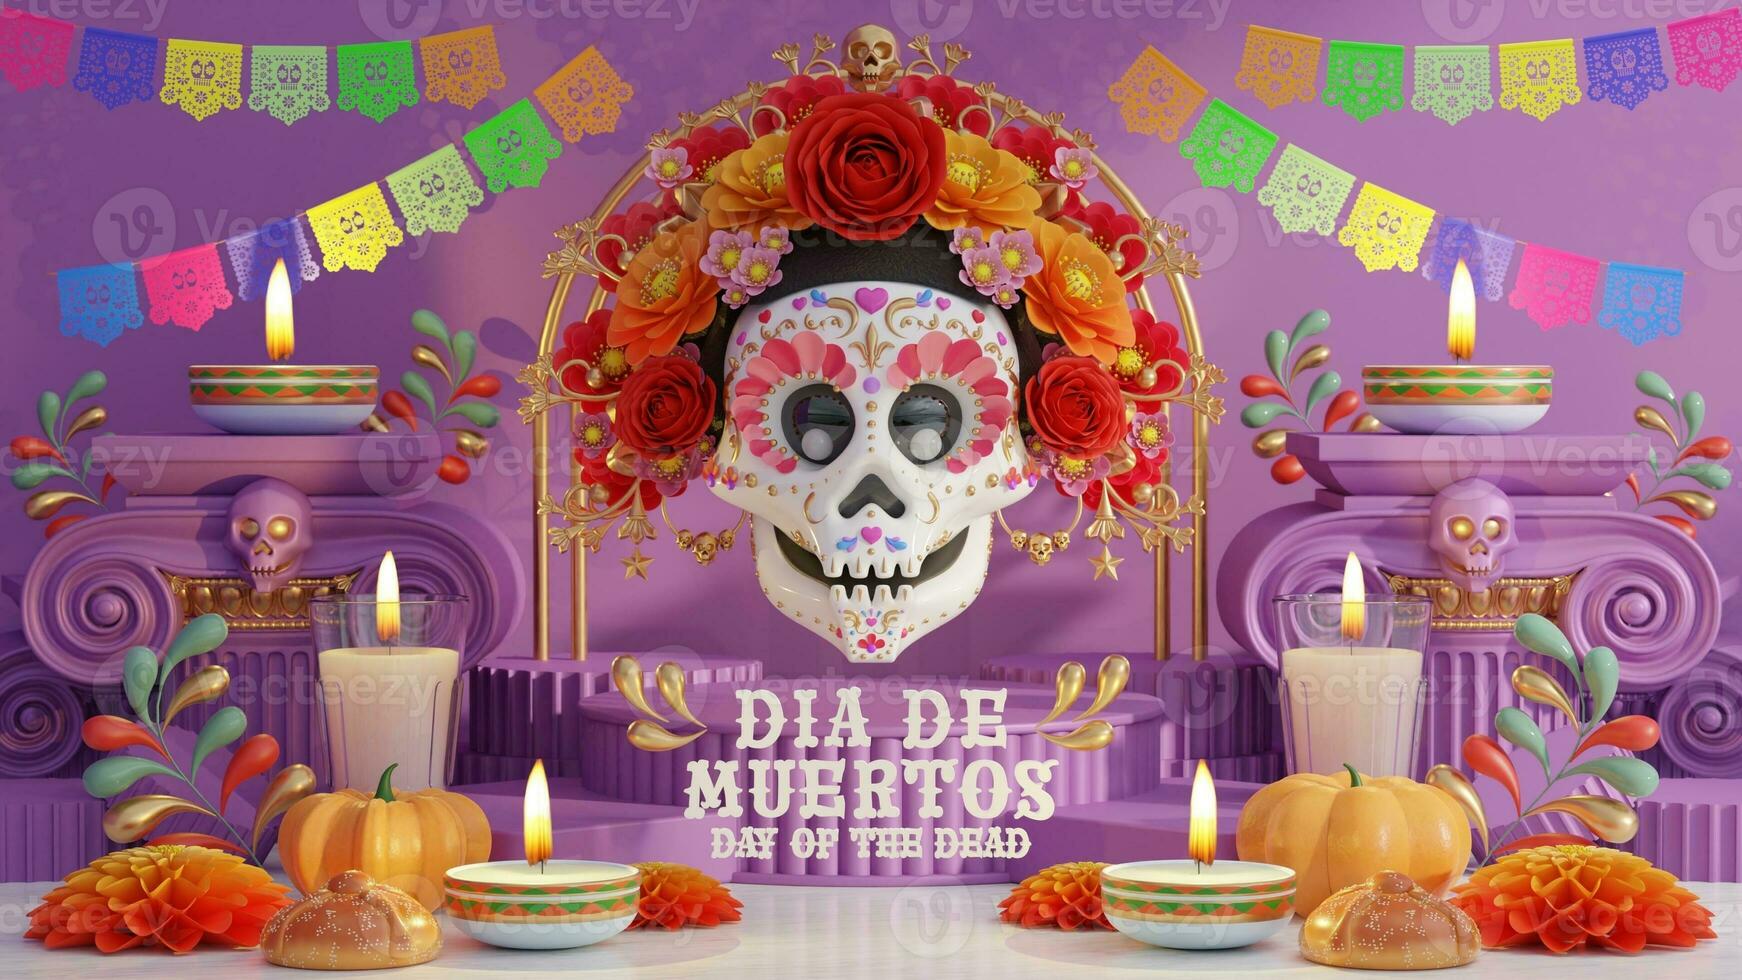 3d rendering illustration for Day of the Dead, Dia de muertos altar concept. Composition of cute sugar skulls, white candles, marigold flowers of the dead. 3d illustration. photo